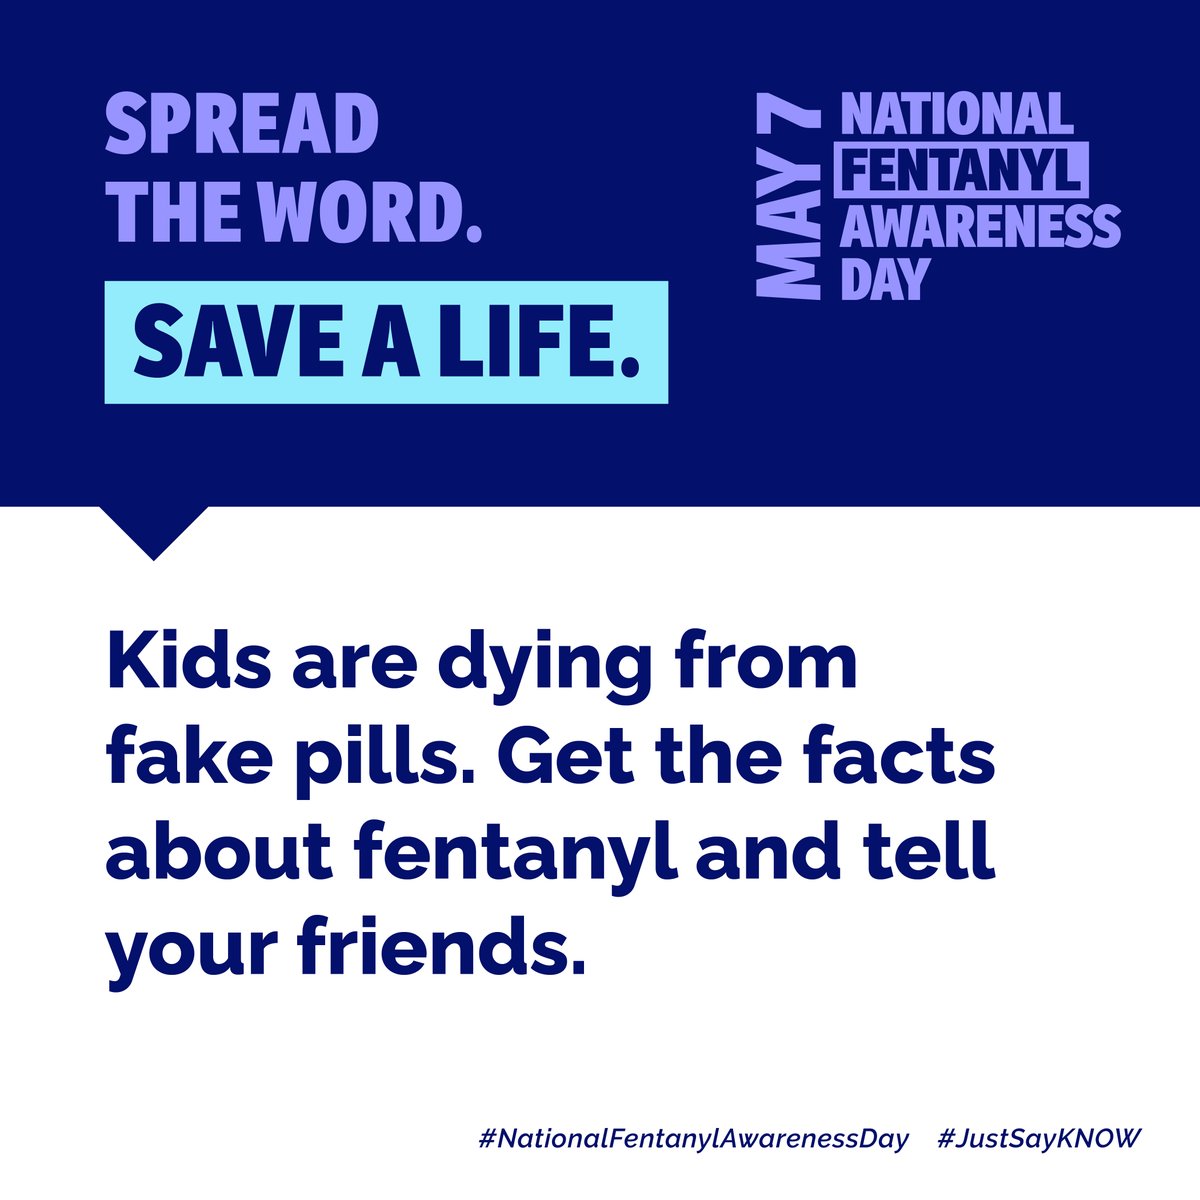 On National Fentanyl Awareness Day, let's unite to combat this crisis. Over 70,000 lives were lost last year. But there's hope. Watch 'Counterfeit Pills — You Need to Know' & host screenings of 'The New Drug Talk.' Let's educate, advocate, and save lives. 💪 #FentanylAwareness